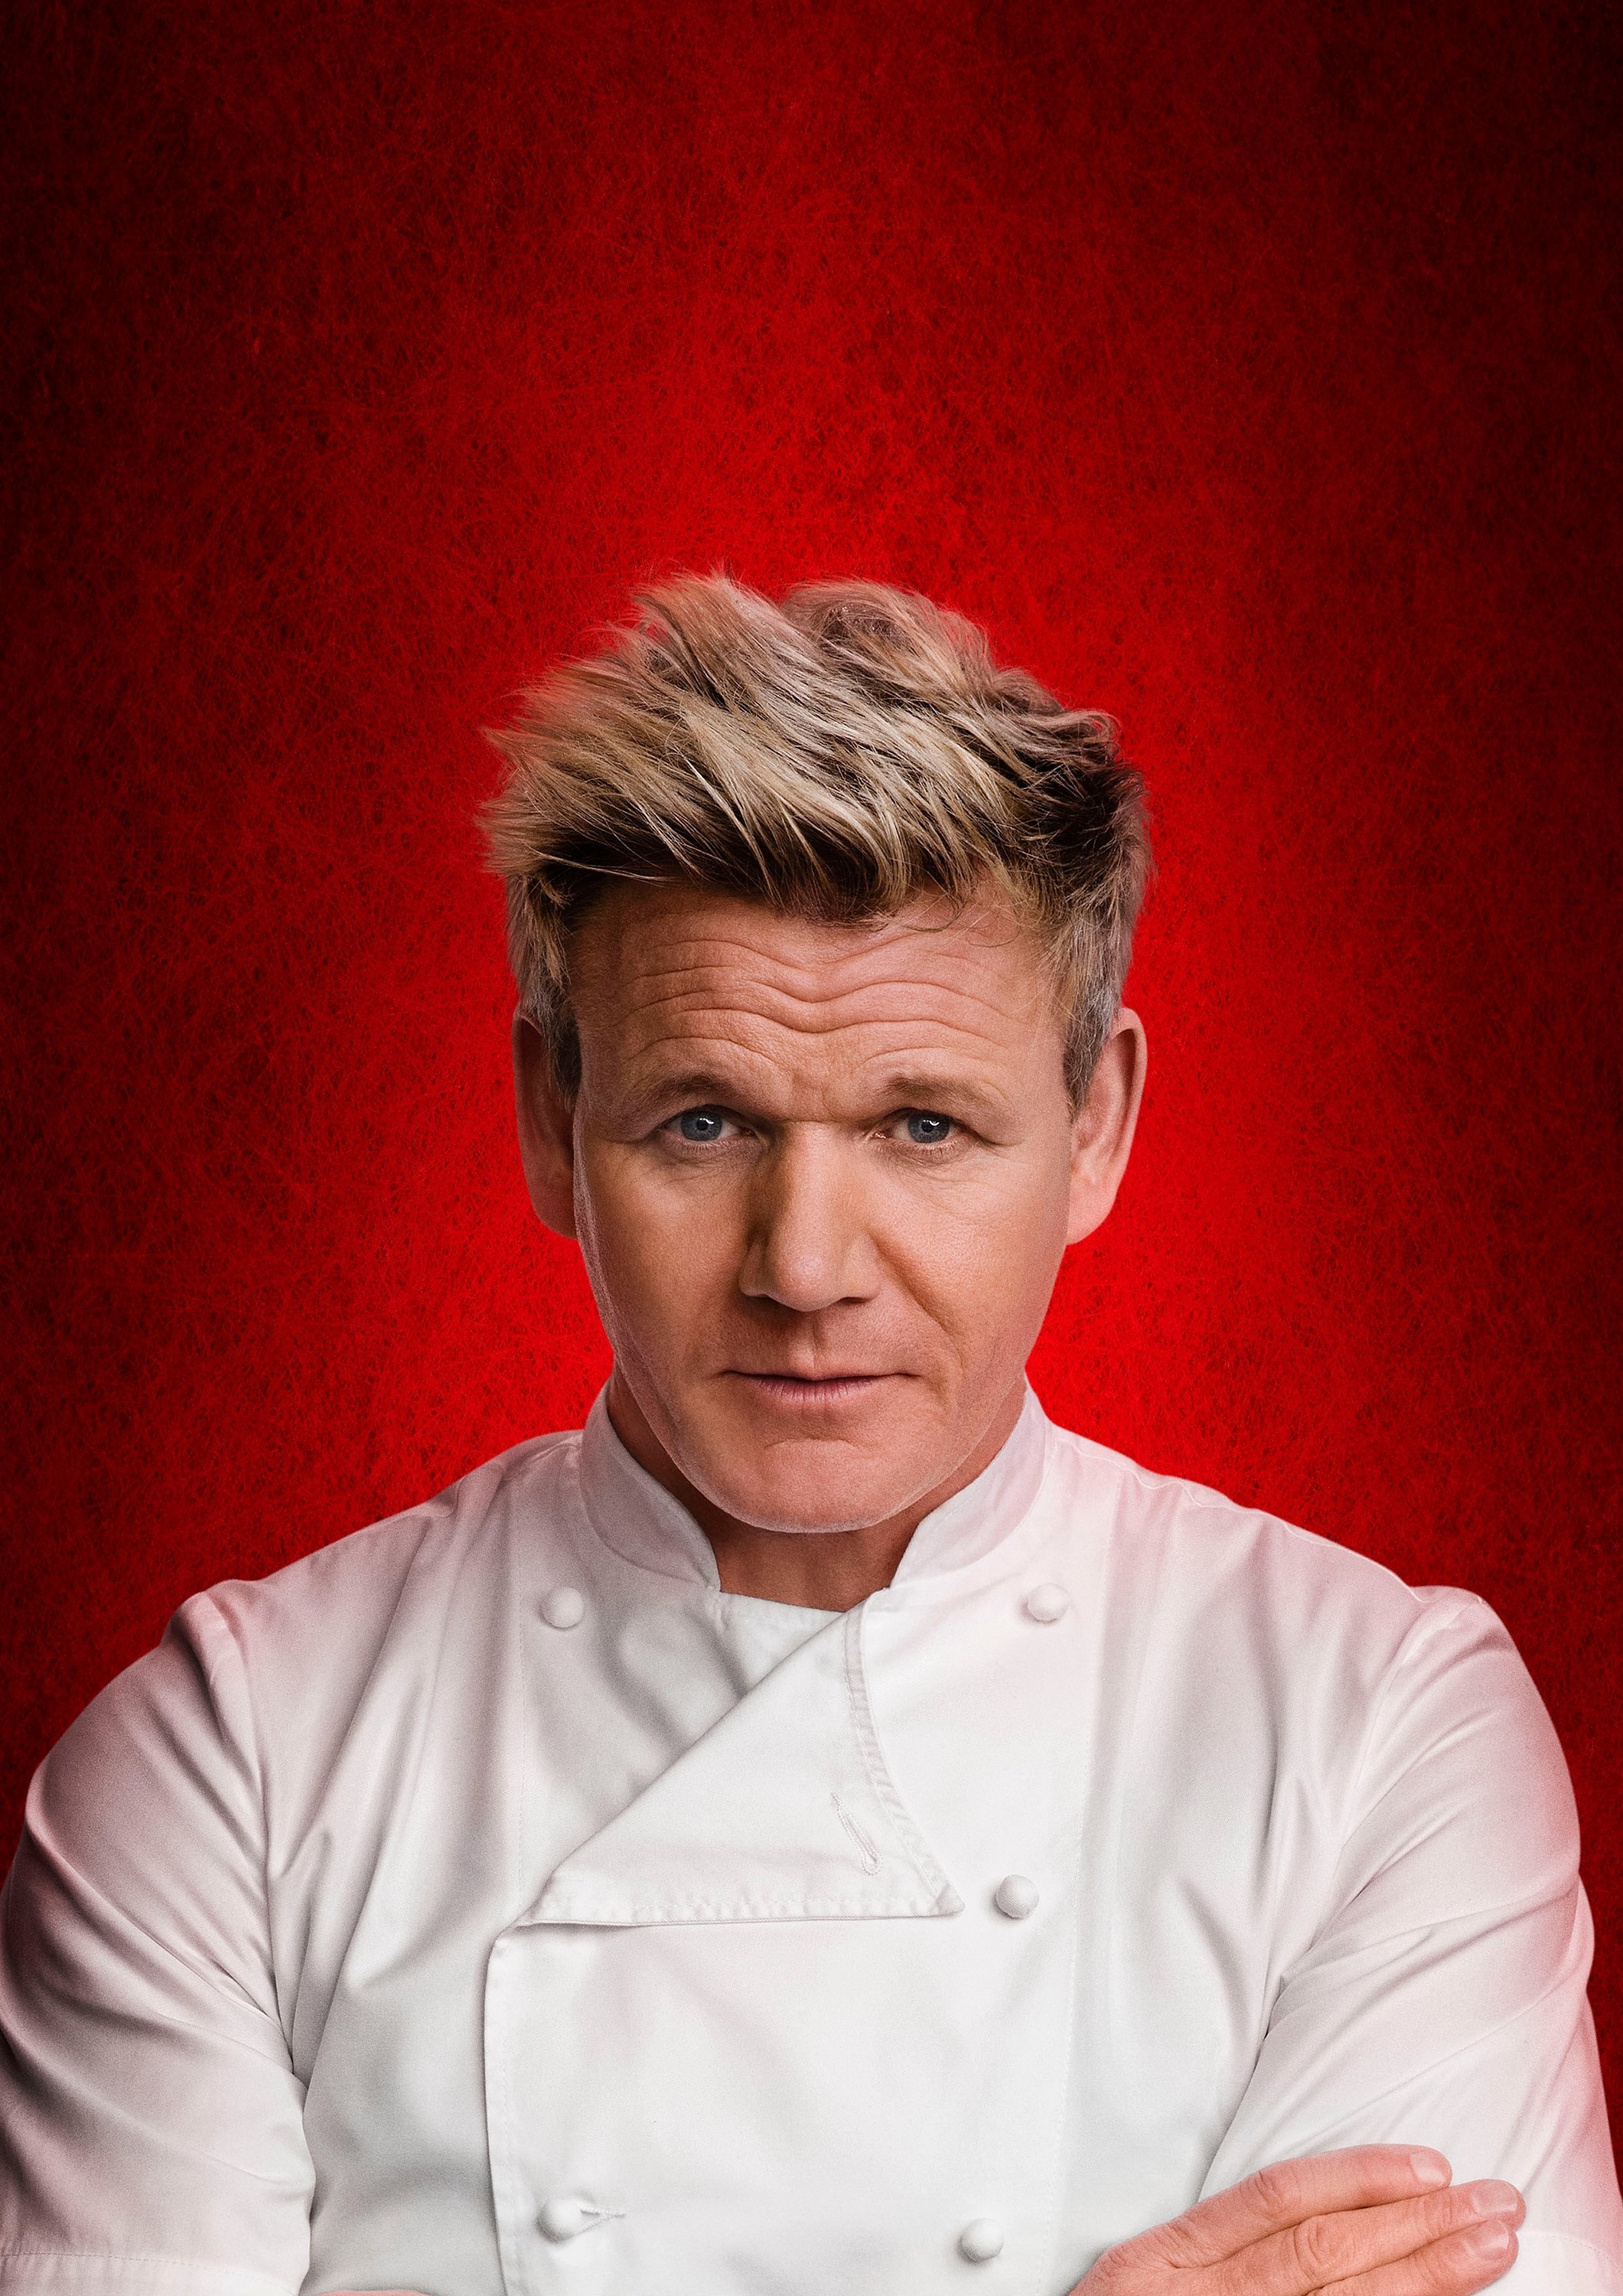 Gordan Ramsay pictured for the 18th season of "Hell's Kitchen." | Photo: Getty Images